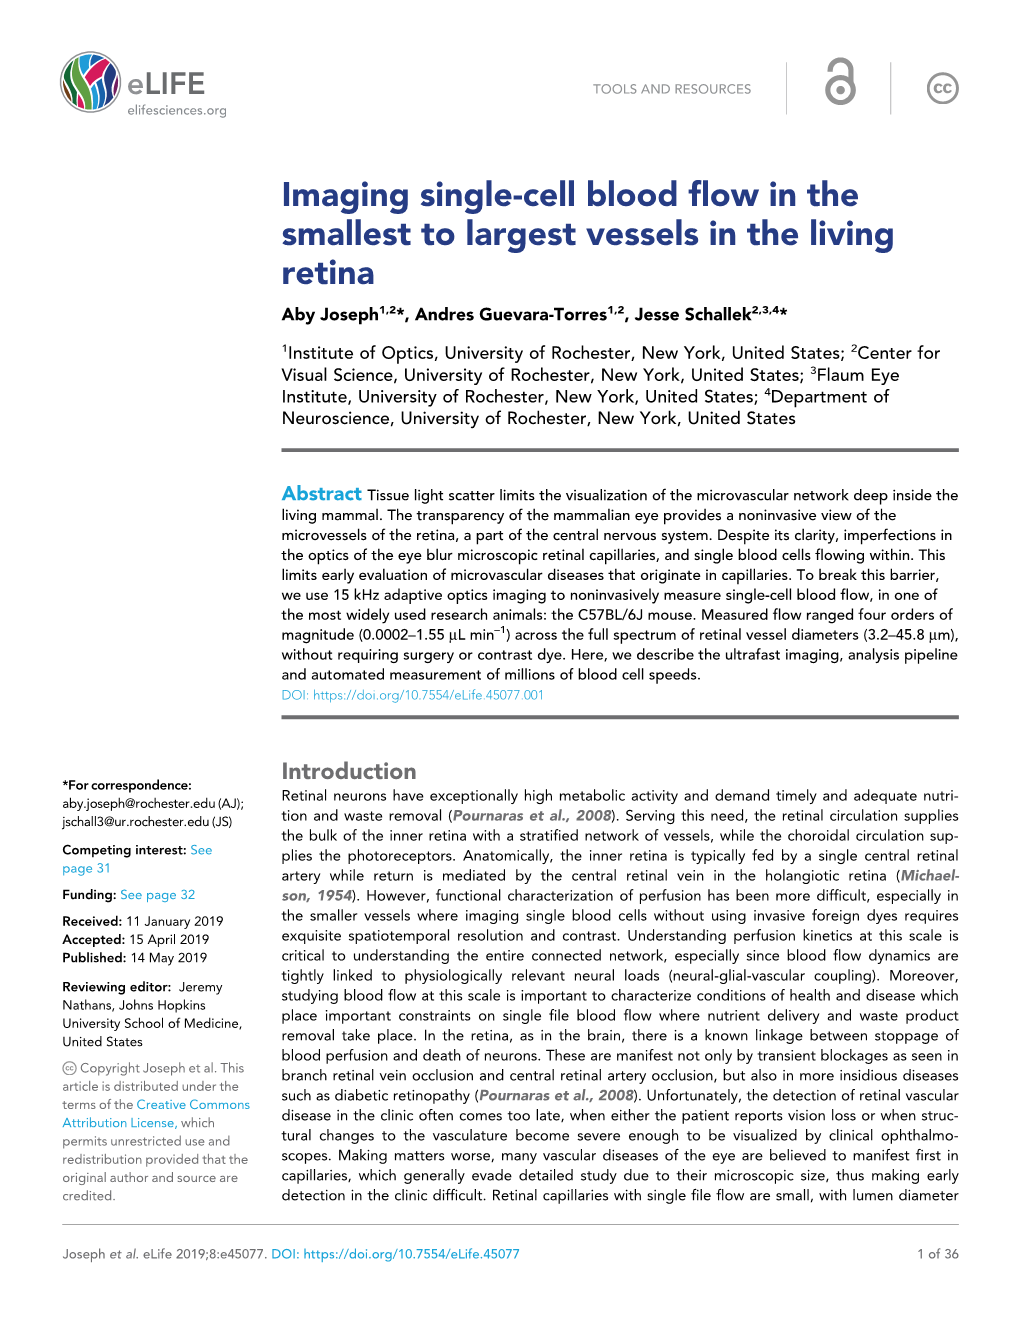 Imaging Single-Cell Blood Flow in the Smallest to Largest Vessels in the Living Retina Aby Joseph1,2*, Andres Guevara-Torres1,2, Jesse Schallek2,3,4*